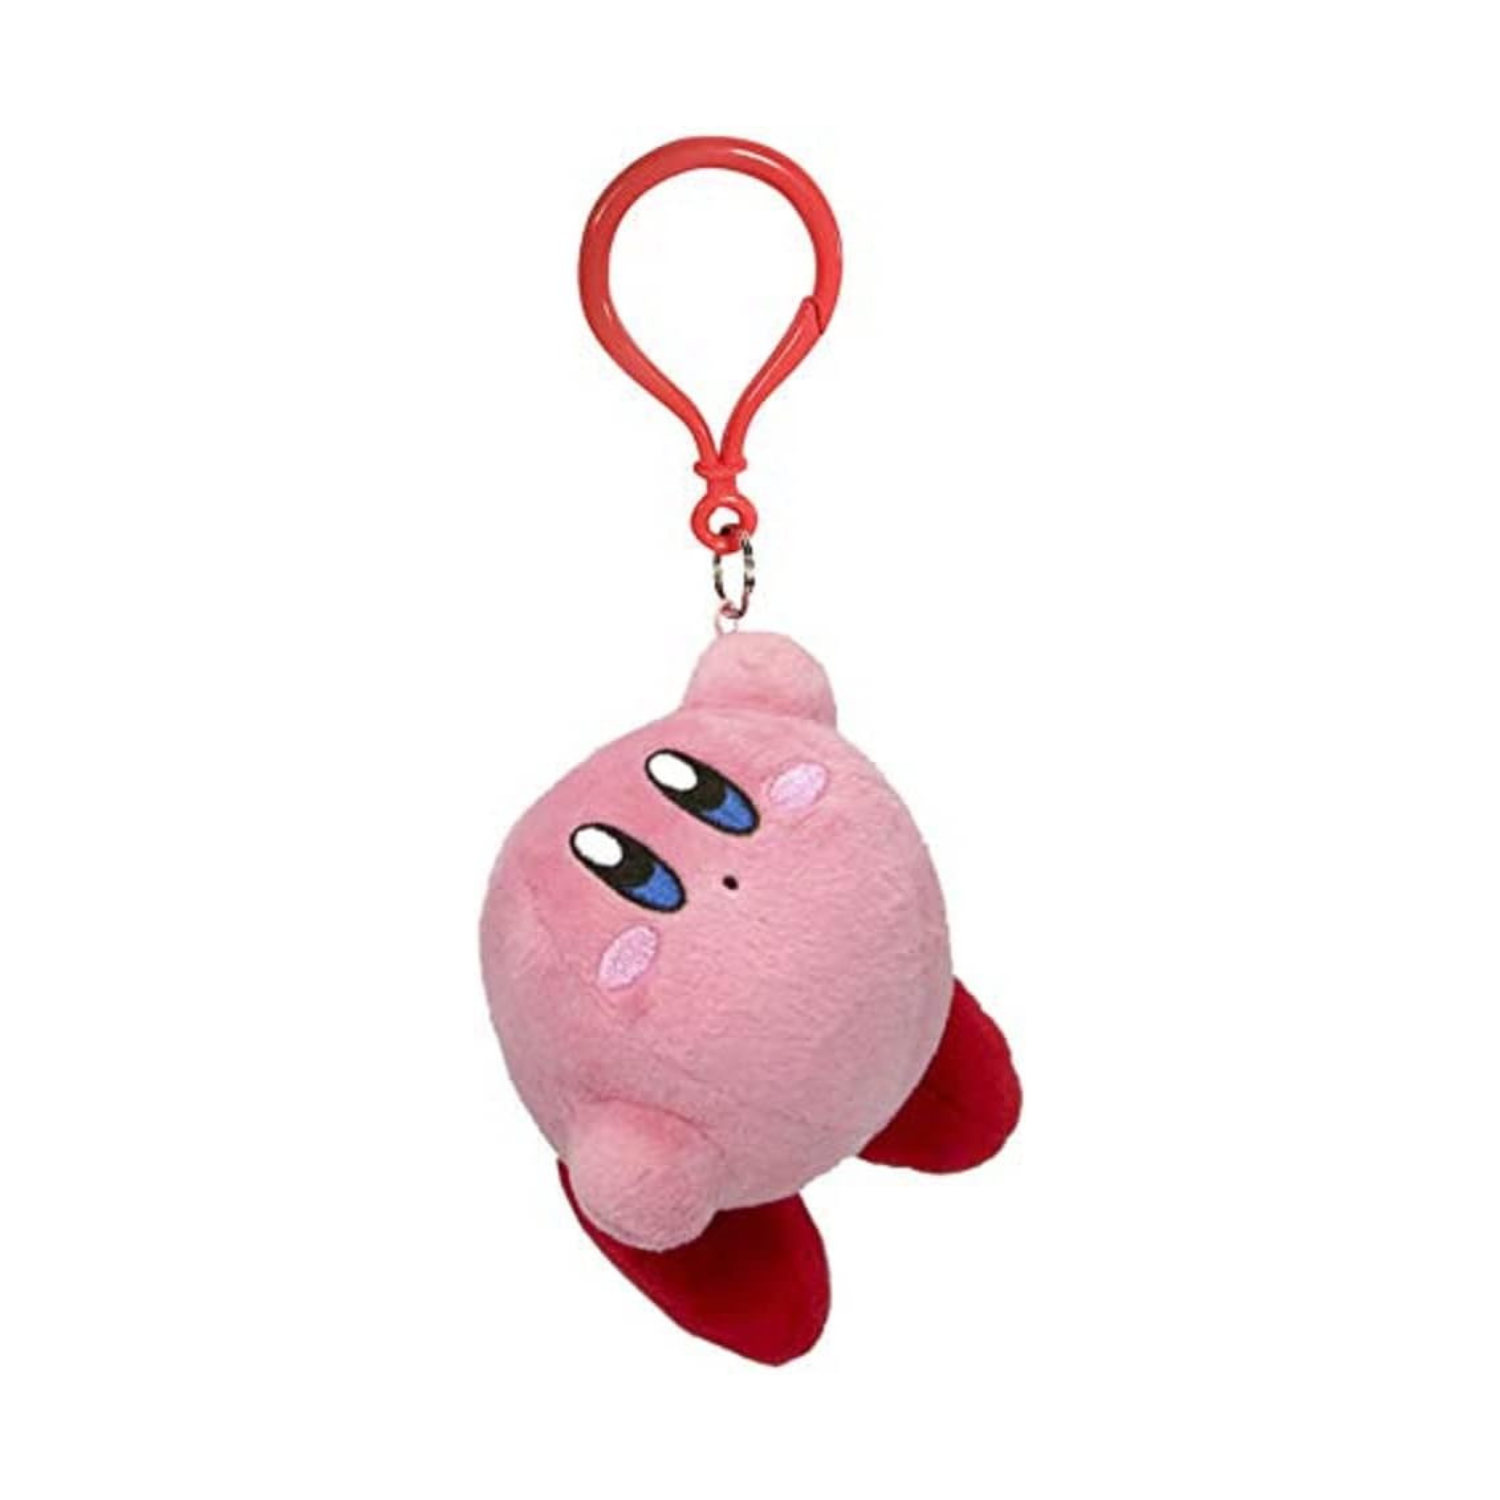 Kirby Sitting Plush 5” Little Buddy Nintendo Video Game Character Pink Red  Feet